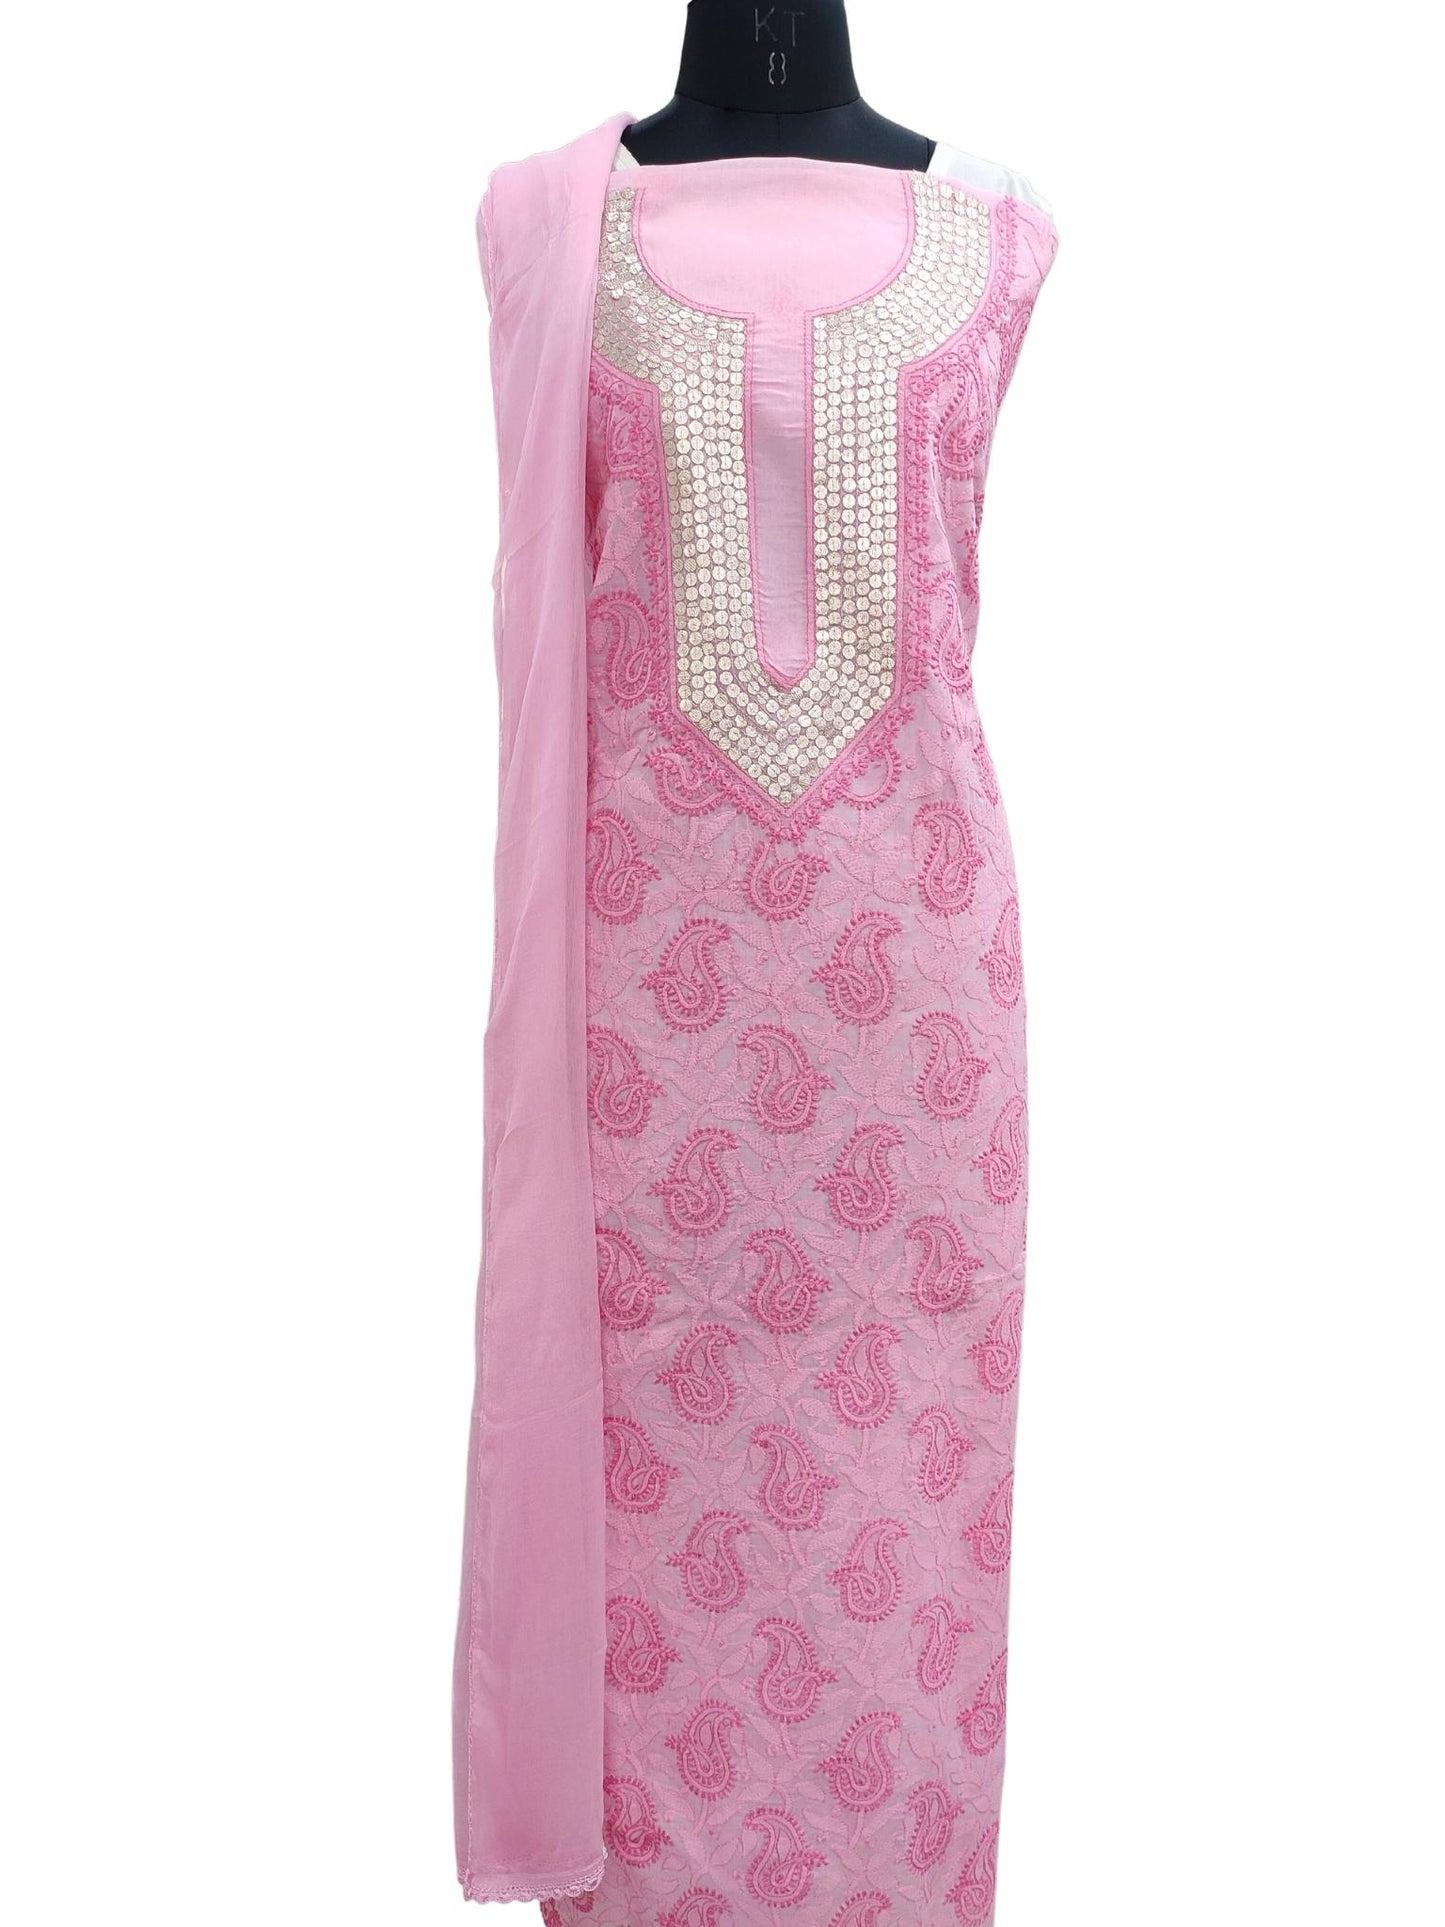 Shyamal Chikan Hand Embroidered Pink Cotton Lucknowi Chikankari Unstitched Suit Piece with Gotapatti work- S18328